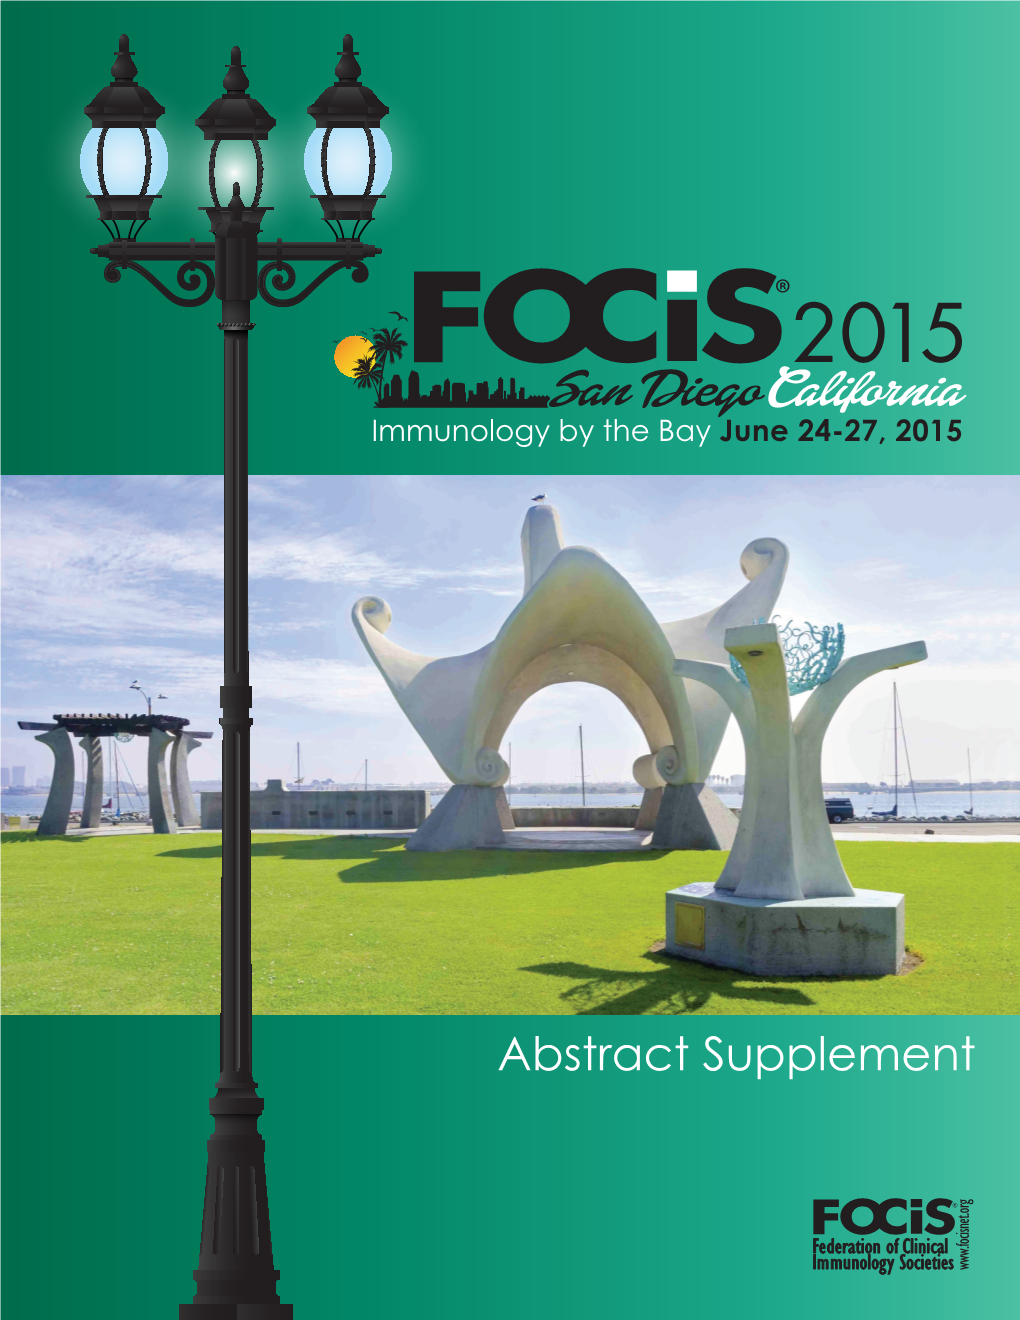 Abstract Supplement Federation of Clinical Immunology Societies June 24 – 27, 2015 San Diego, California